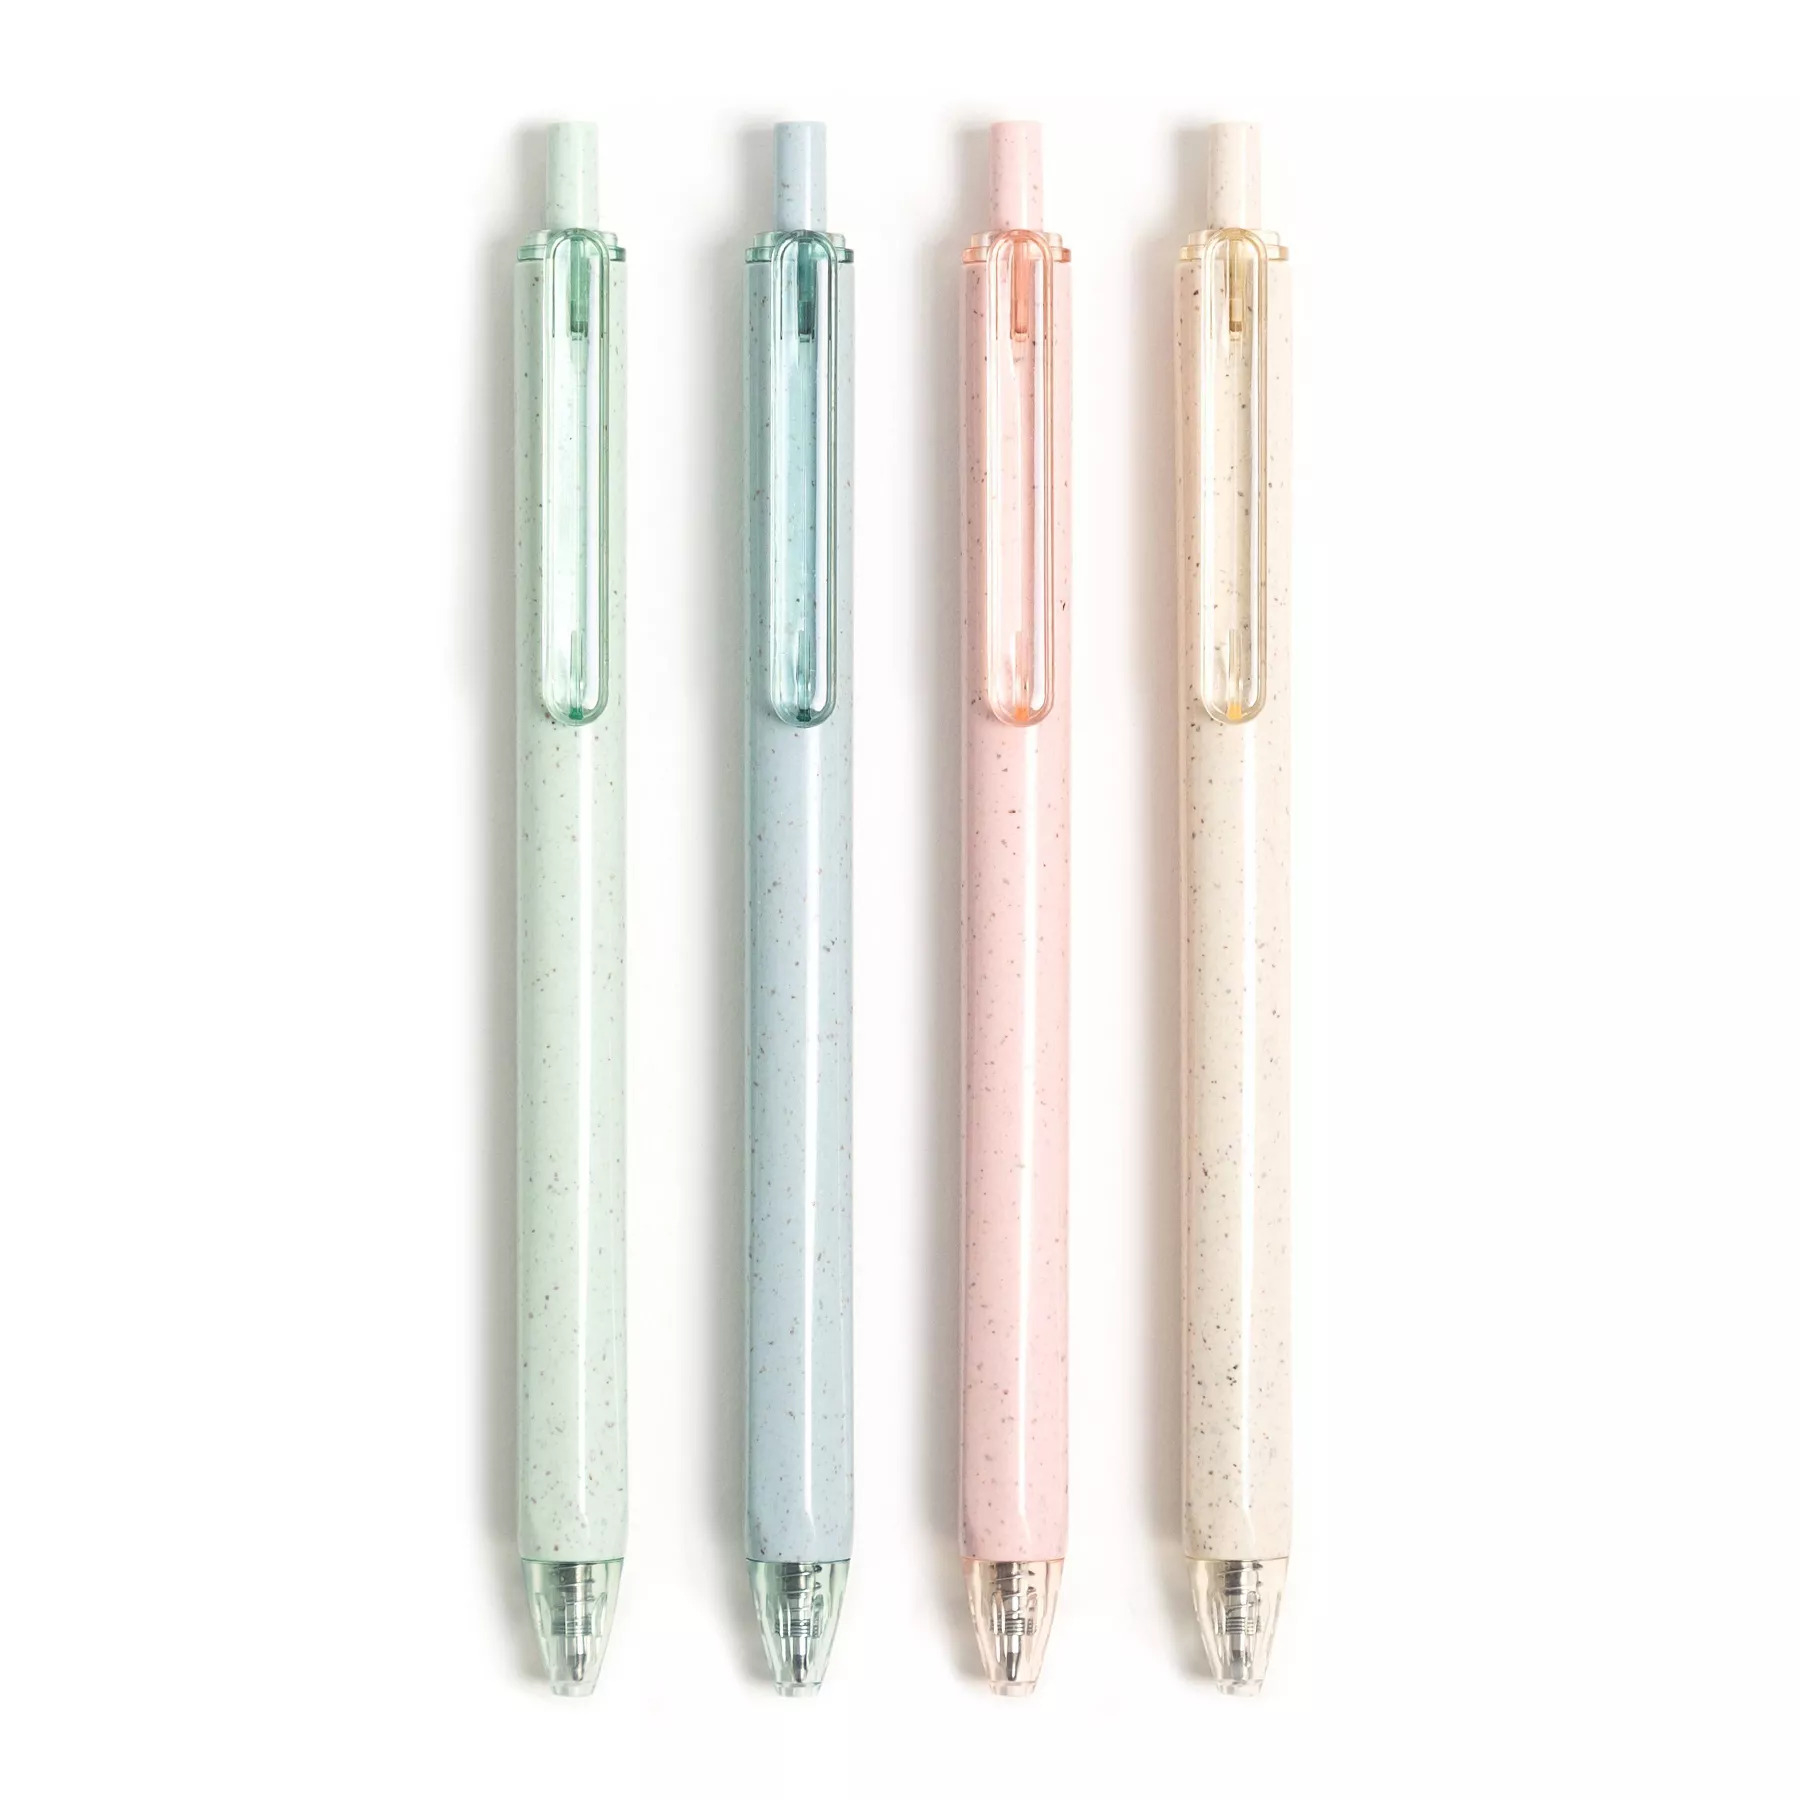 Four speckled pens in green, blue, pink, and beige, aligned vertically on a white background